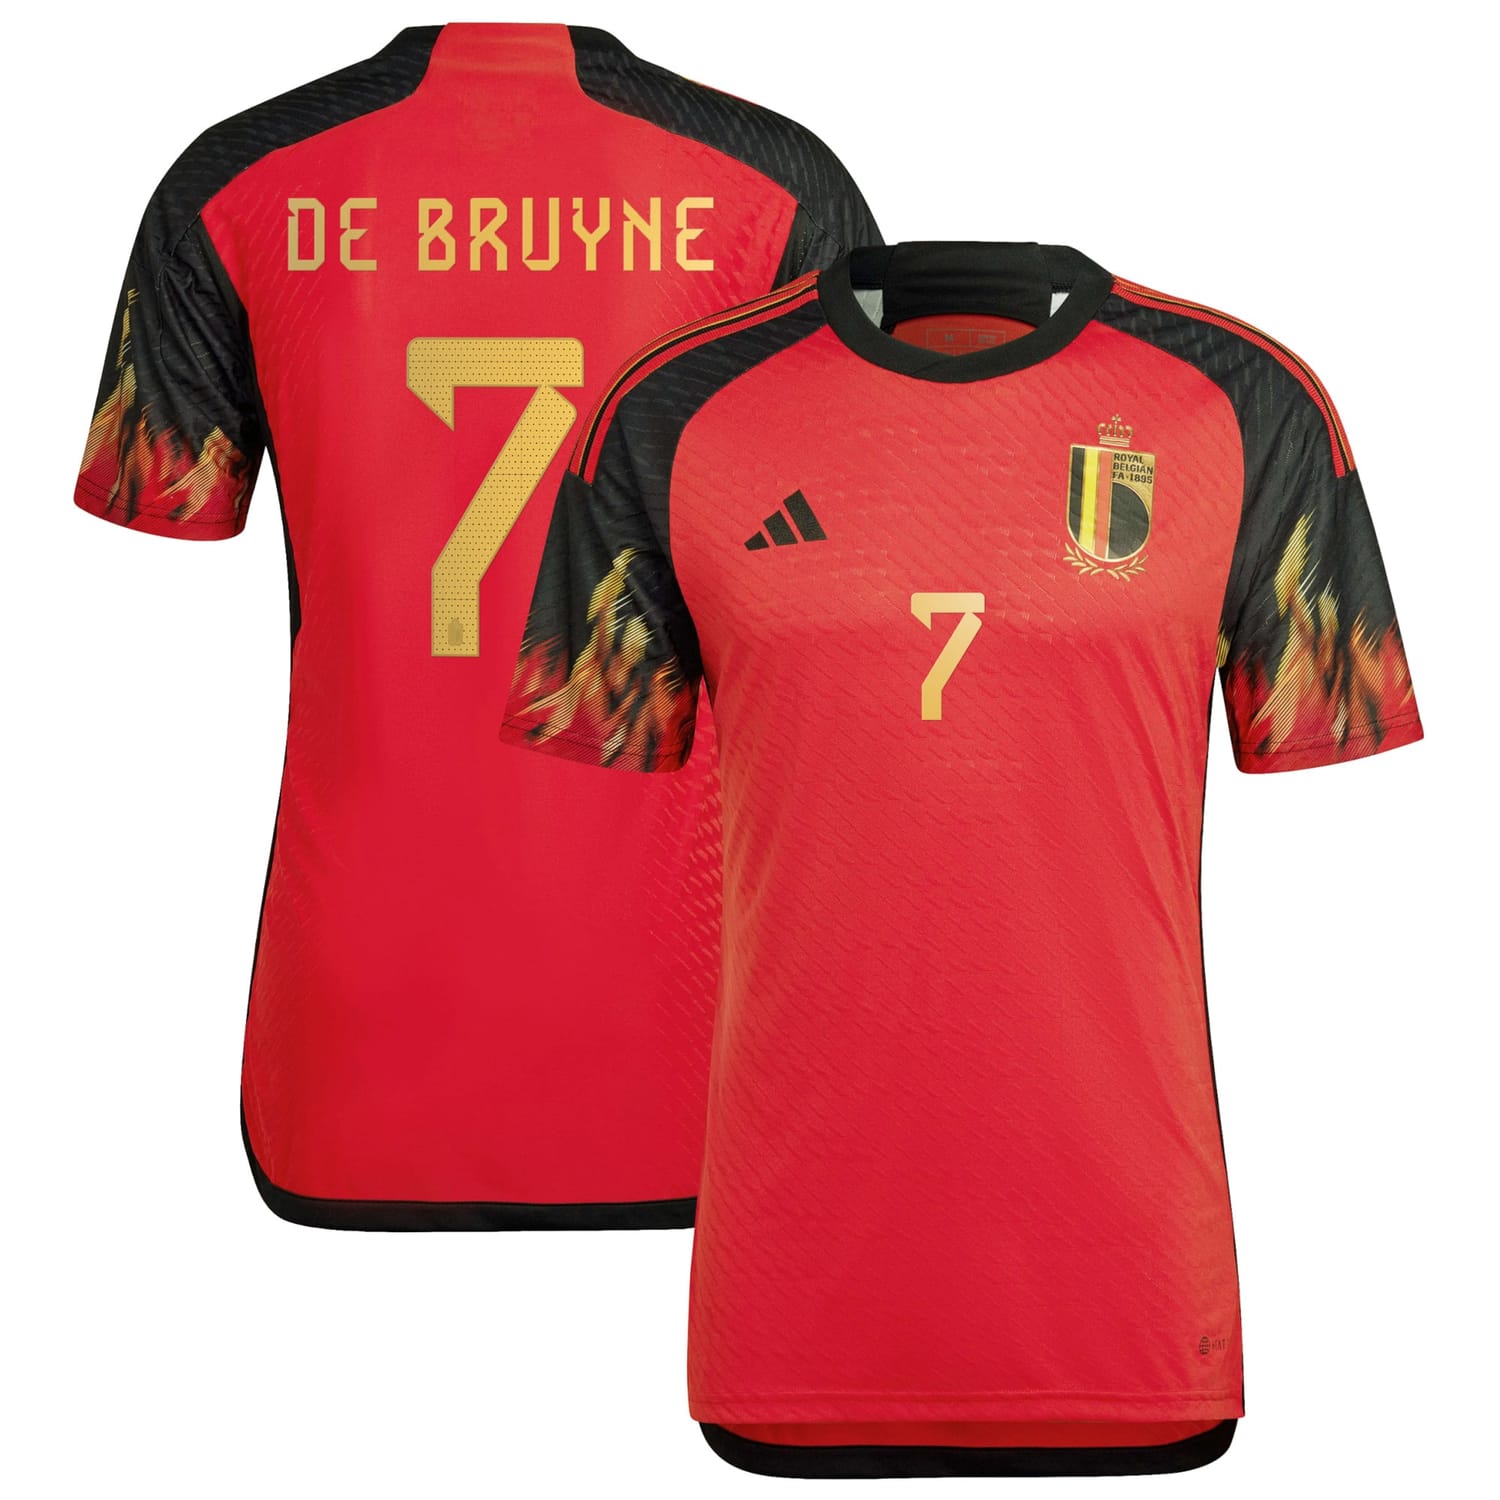 Belgium National Team Home Authentic Jersey Shirt player Kevin De Bruyne 7 printing for Men